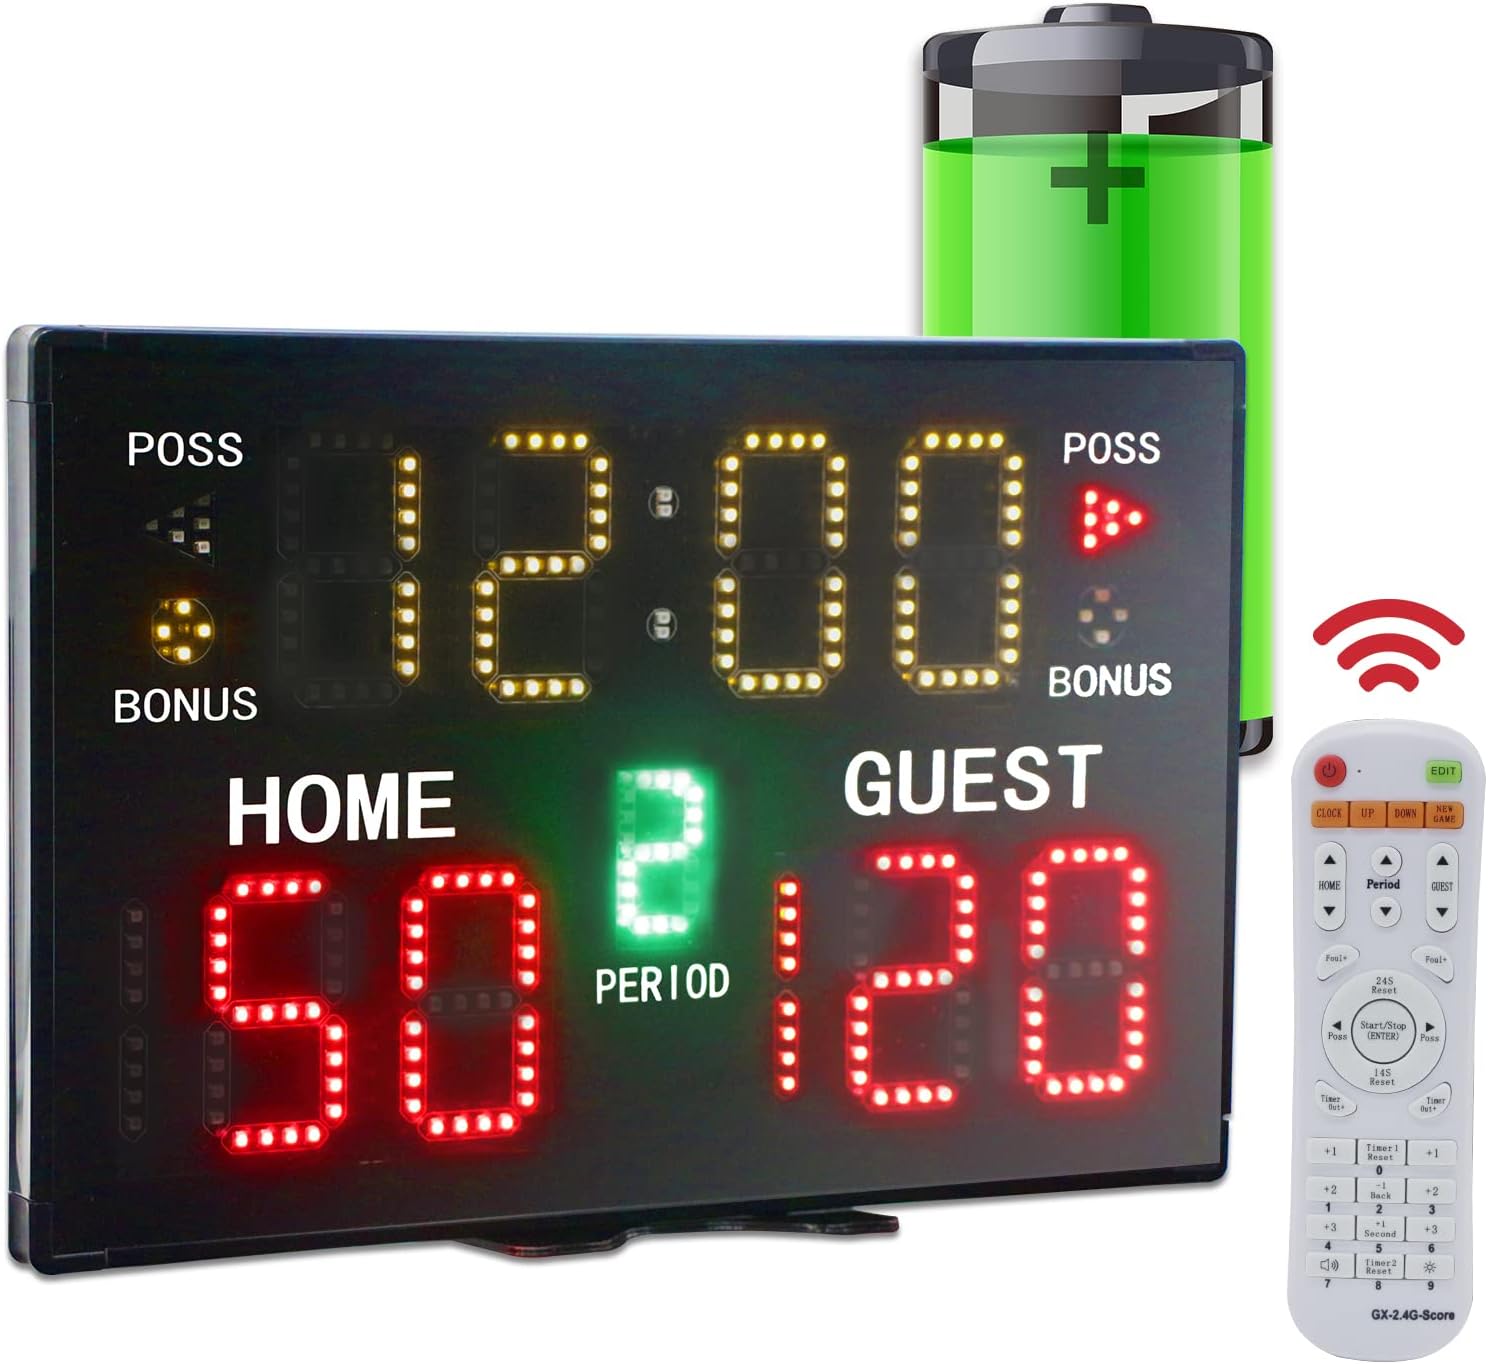 Battery Powered Electronic Basketball Scoreboard Timer Clock with Buzzer, Portable Tabletop Digital Scoreboard with Remote, Wall-Mounted Professional Score Clock 